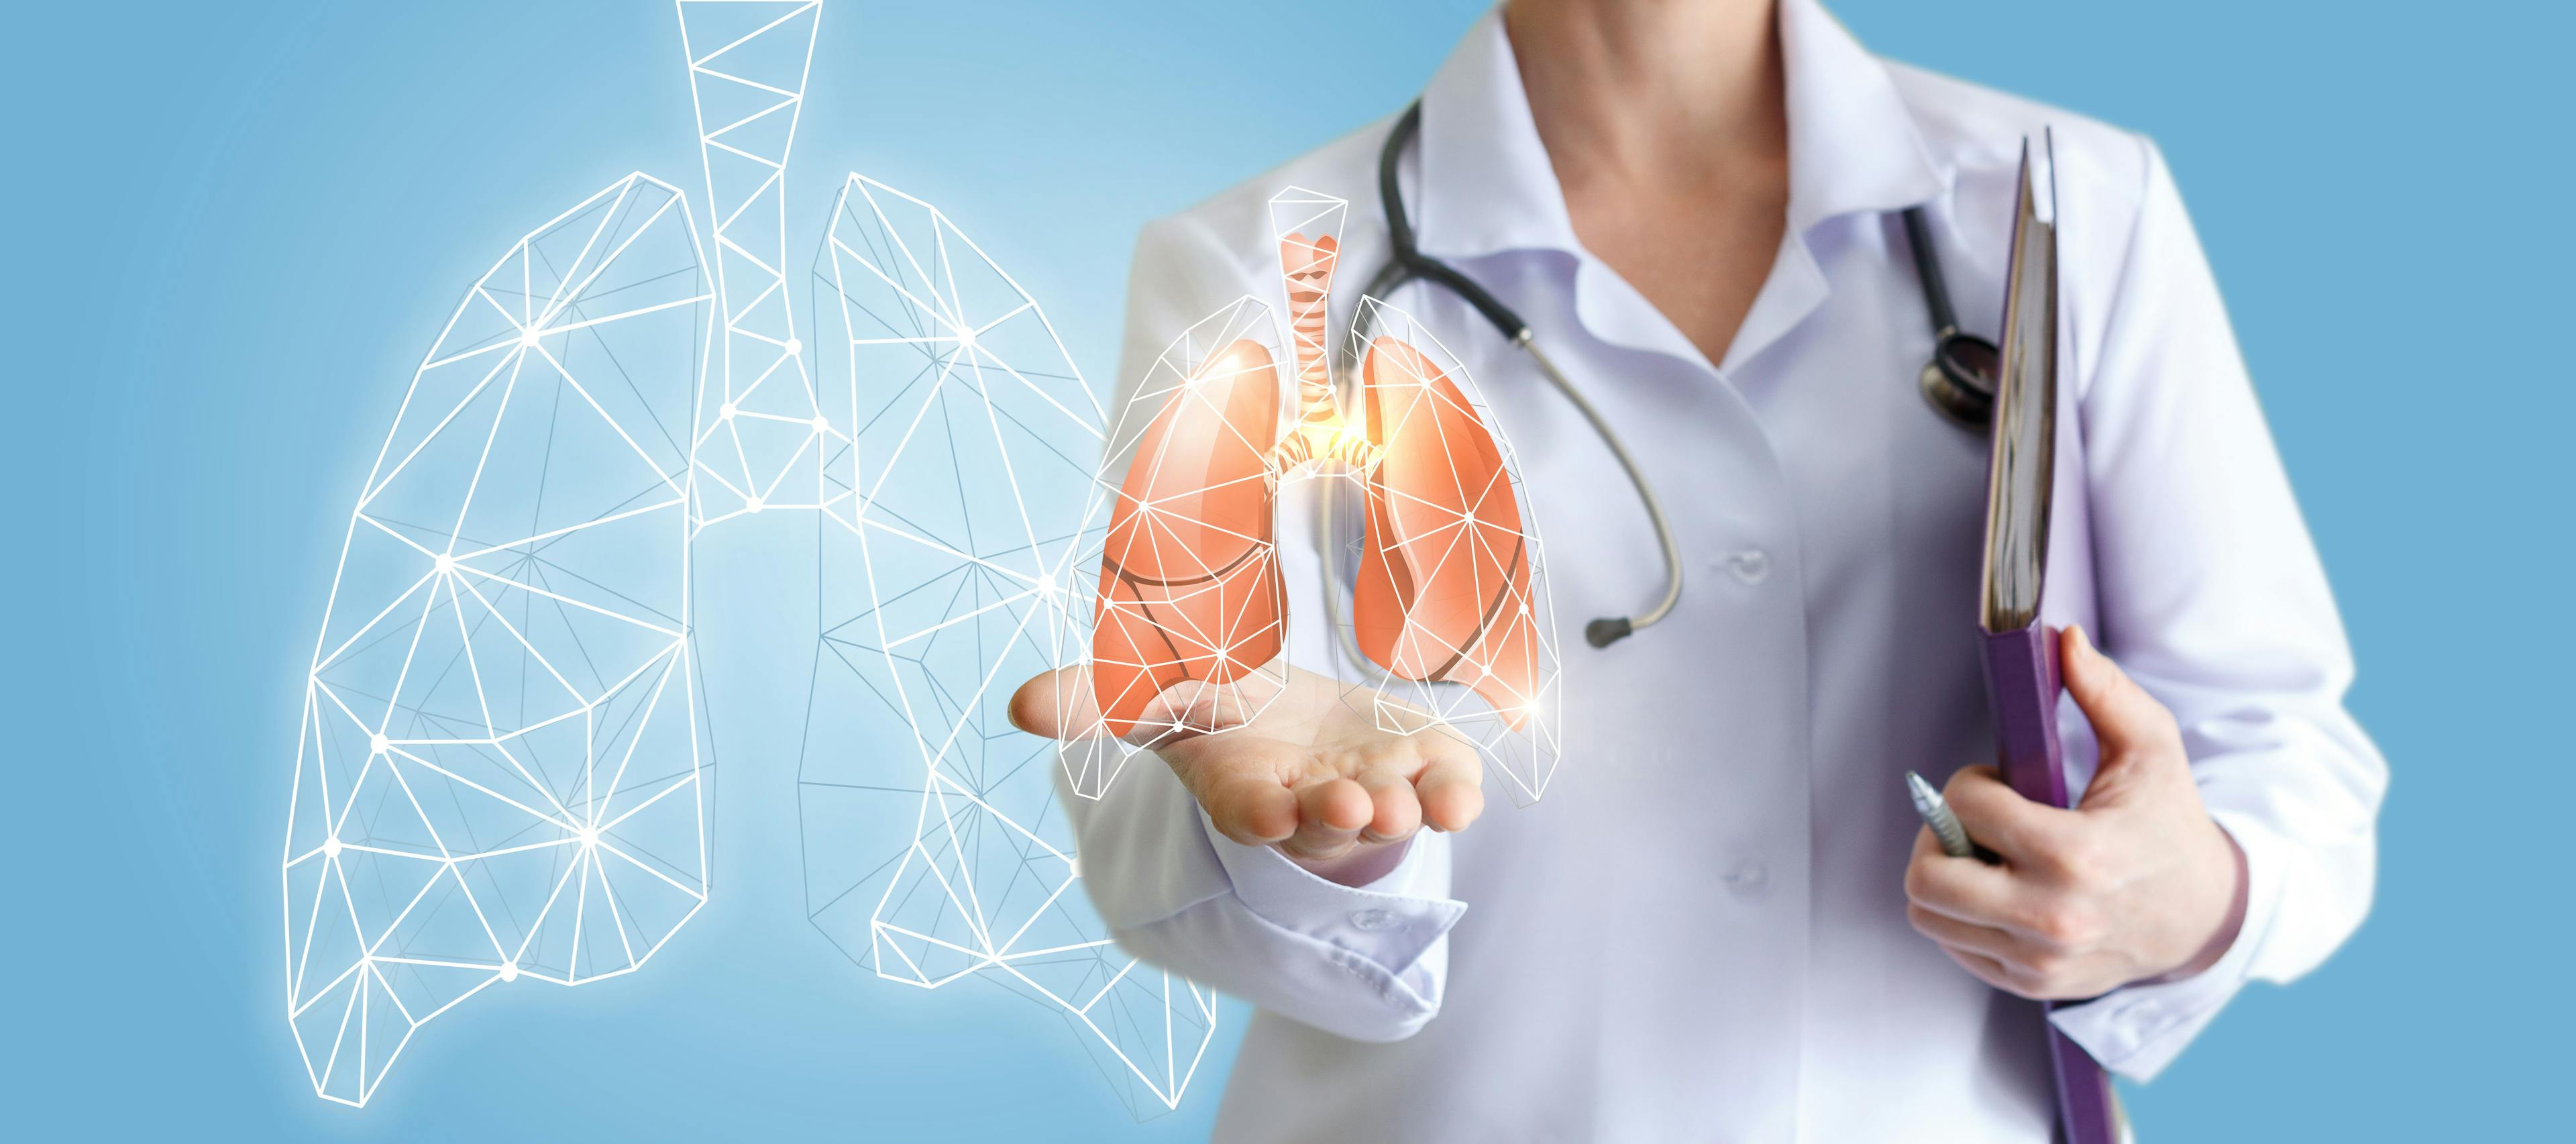 Researchers Identify Patients With COPD at Risk for Hypercapnia Development